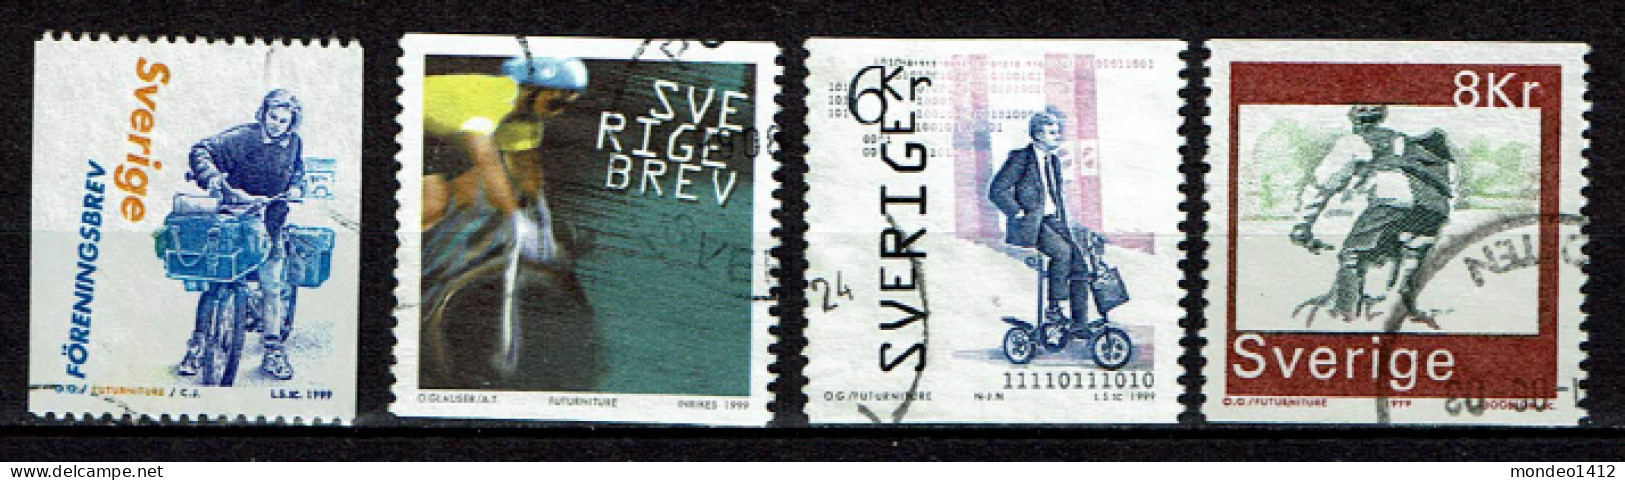 Sweden 1999 - Yv 2100/03 - Cycle, Bicycle, Cicli, Vélo, Fahrrad, Rijwiel, Fiets - Used Stamps